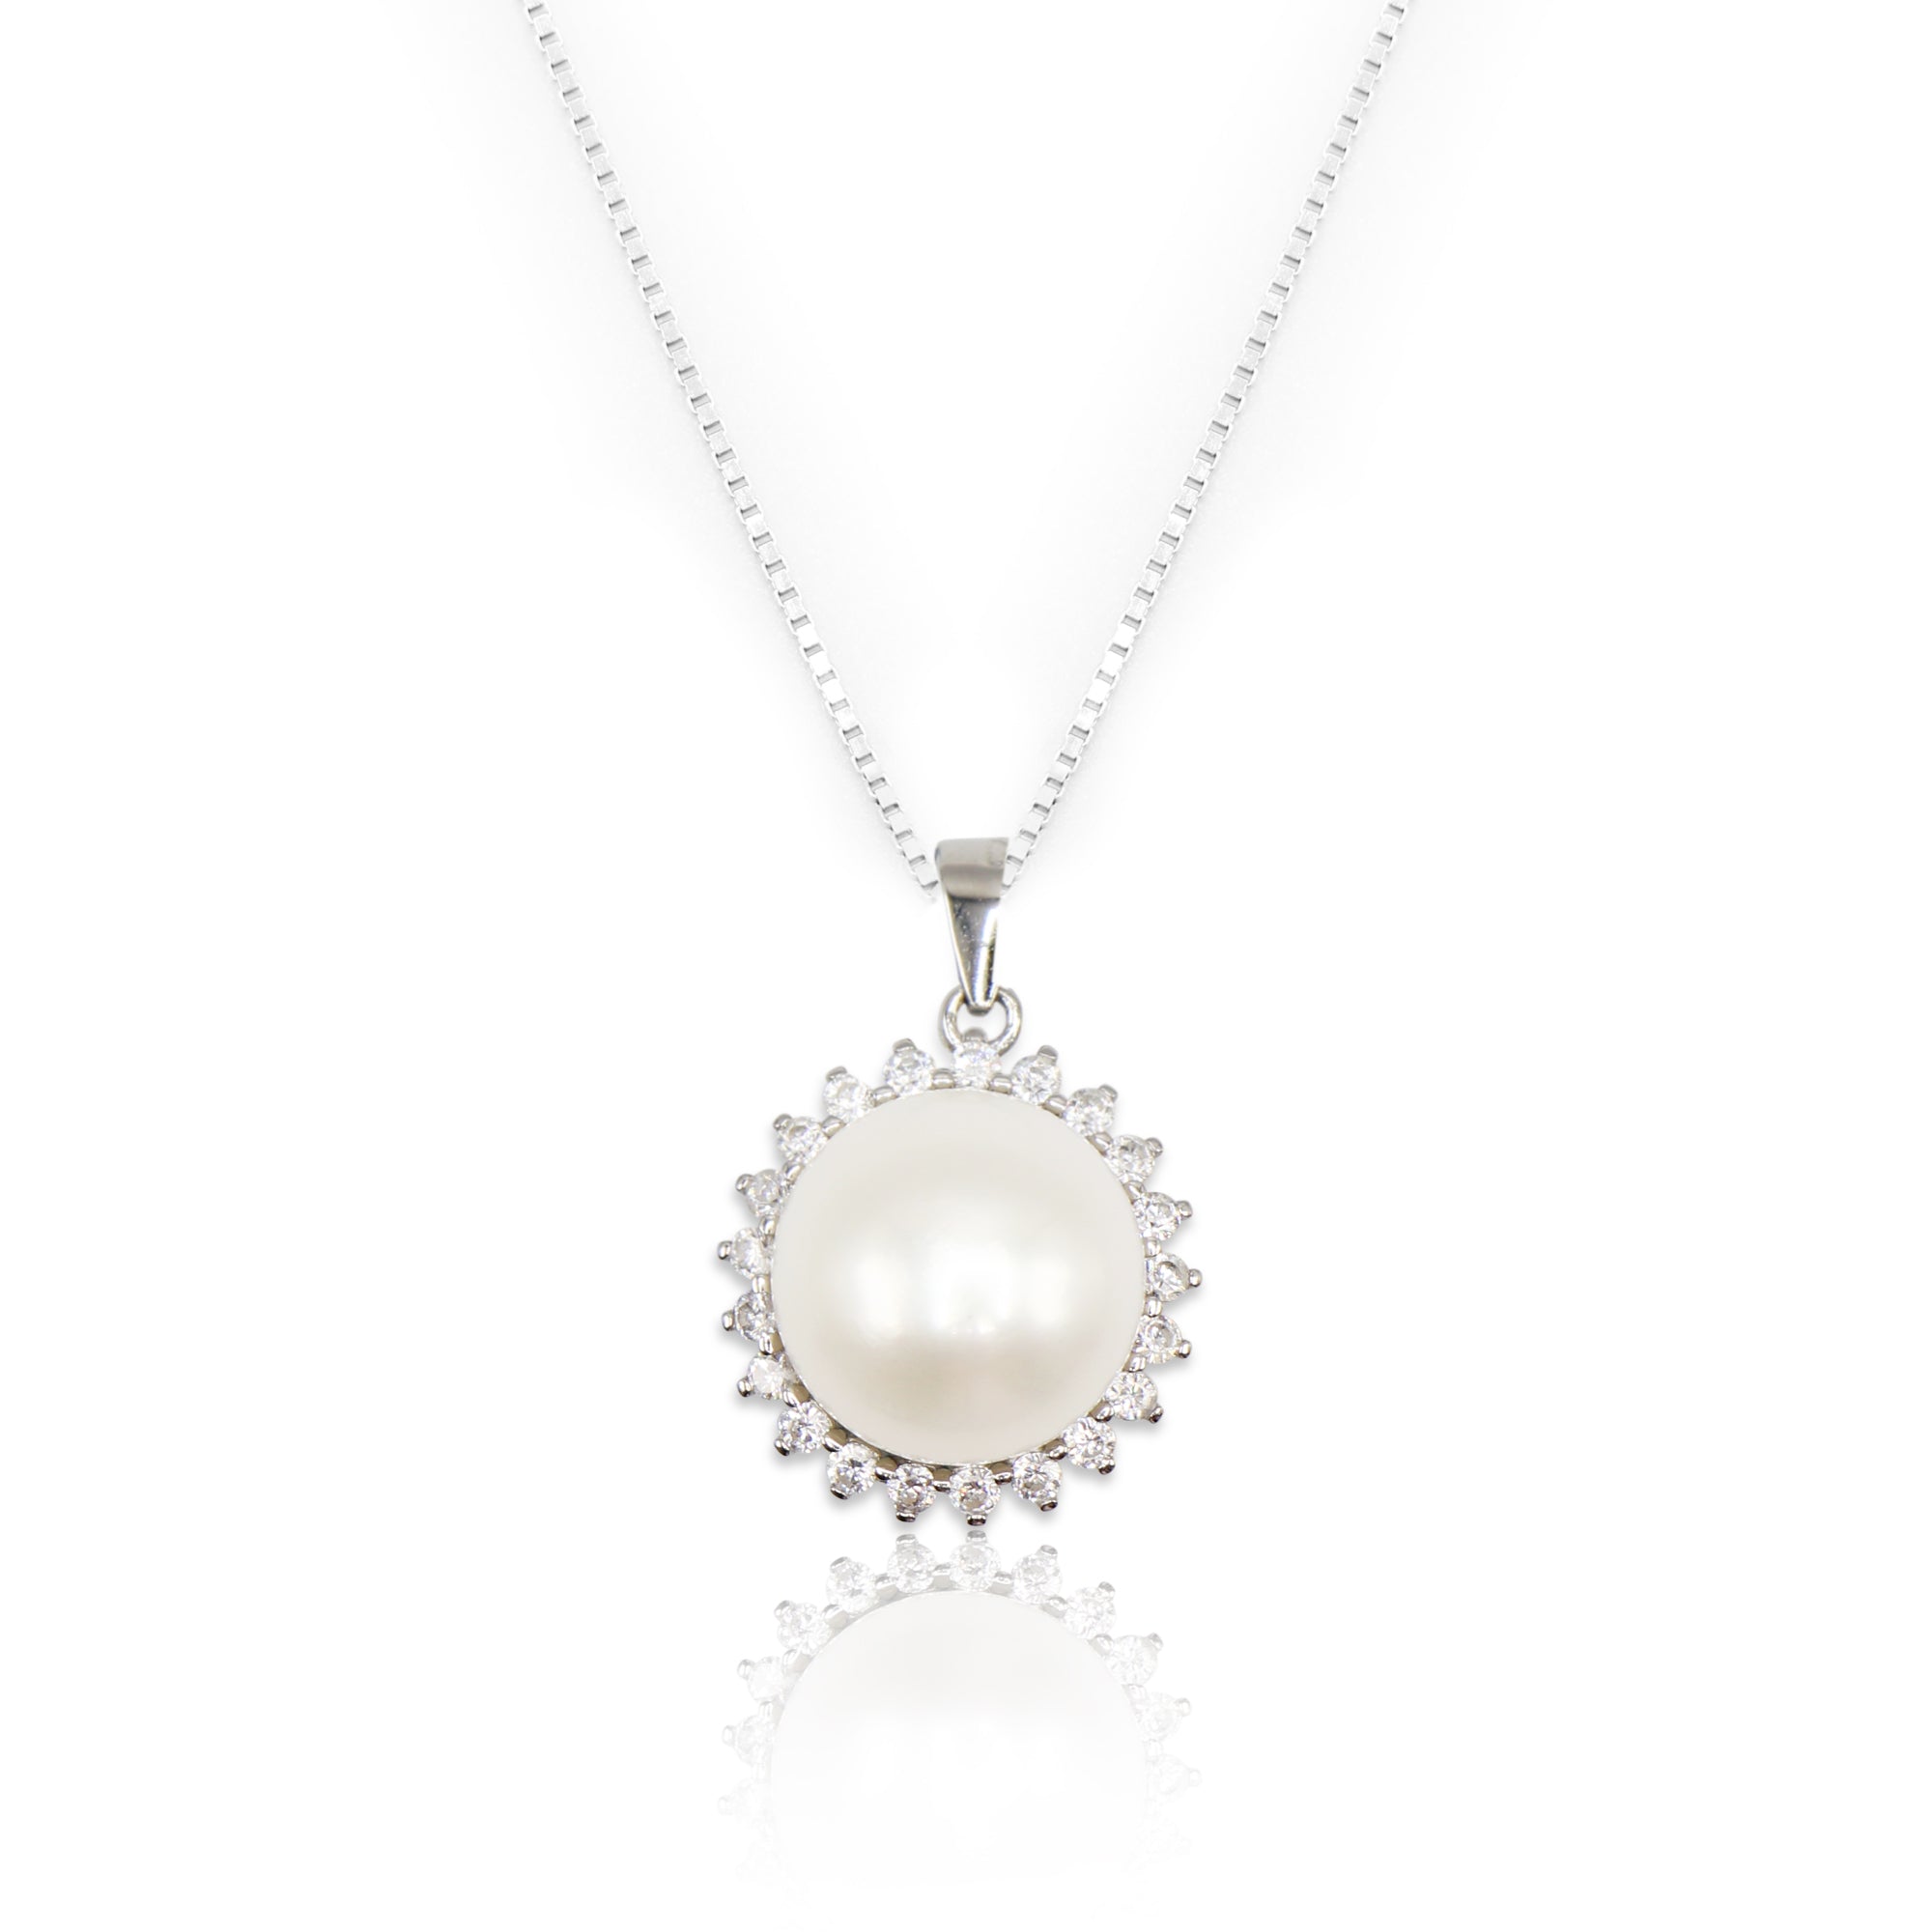 White Freshwater Pearl Halo Pendant with Sterling Silver Chain - L'Amour Pearls